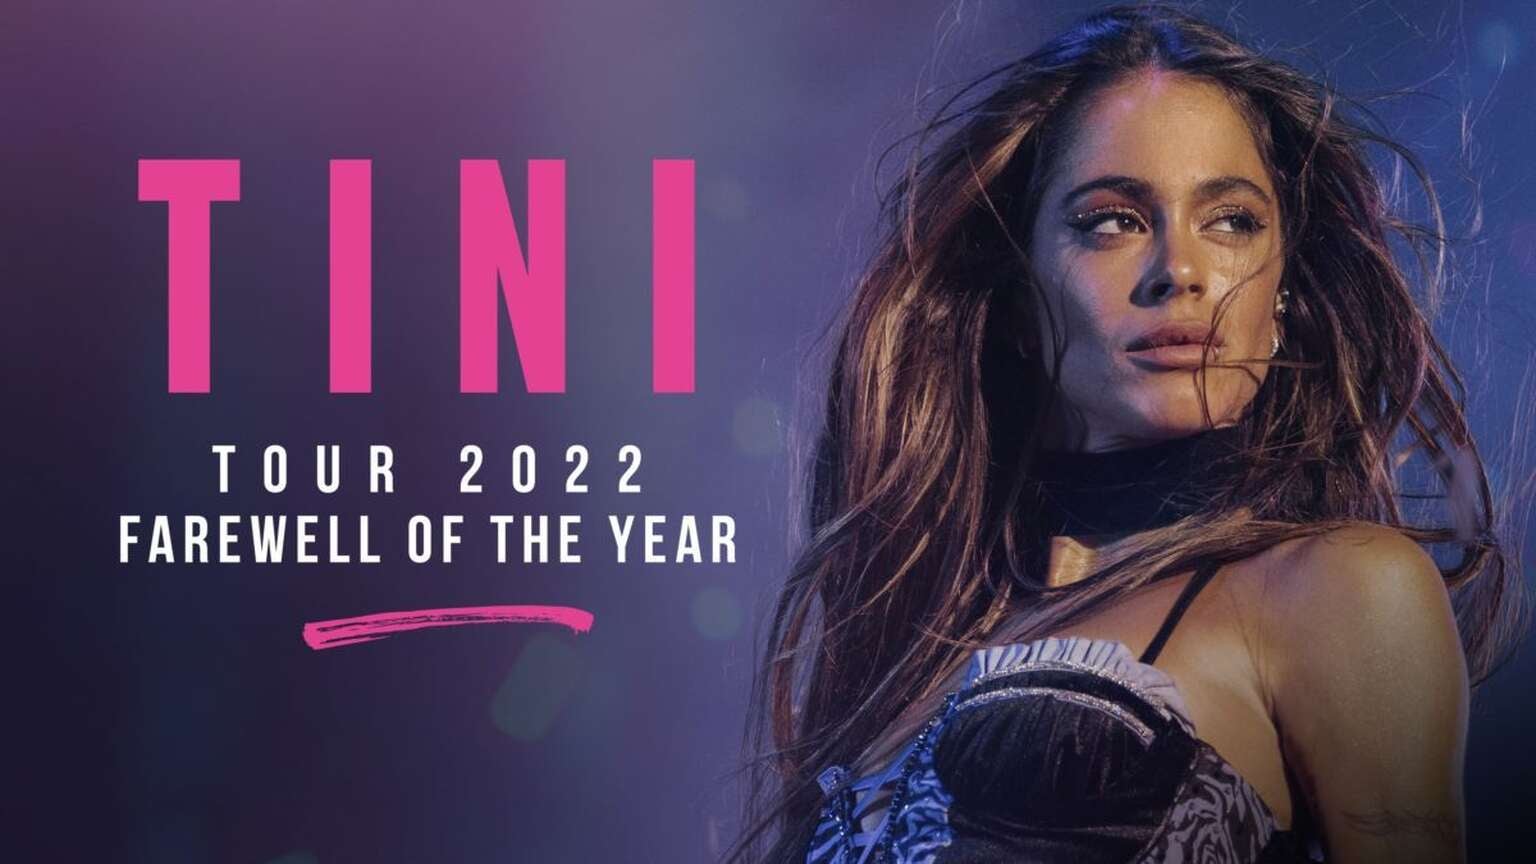 How to Watch 'Tini Tour 2022 Farewell of the Year' Live Without Cable